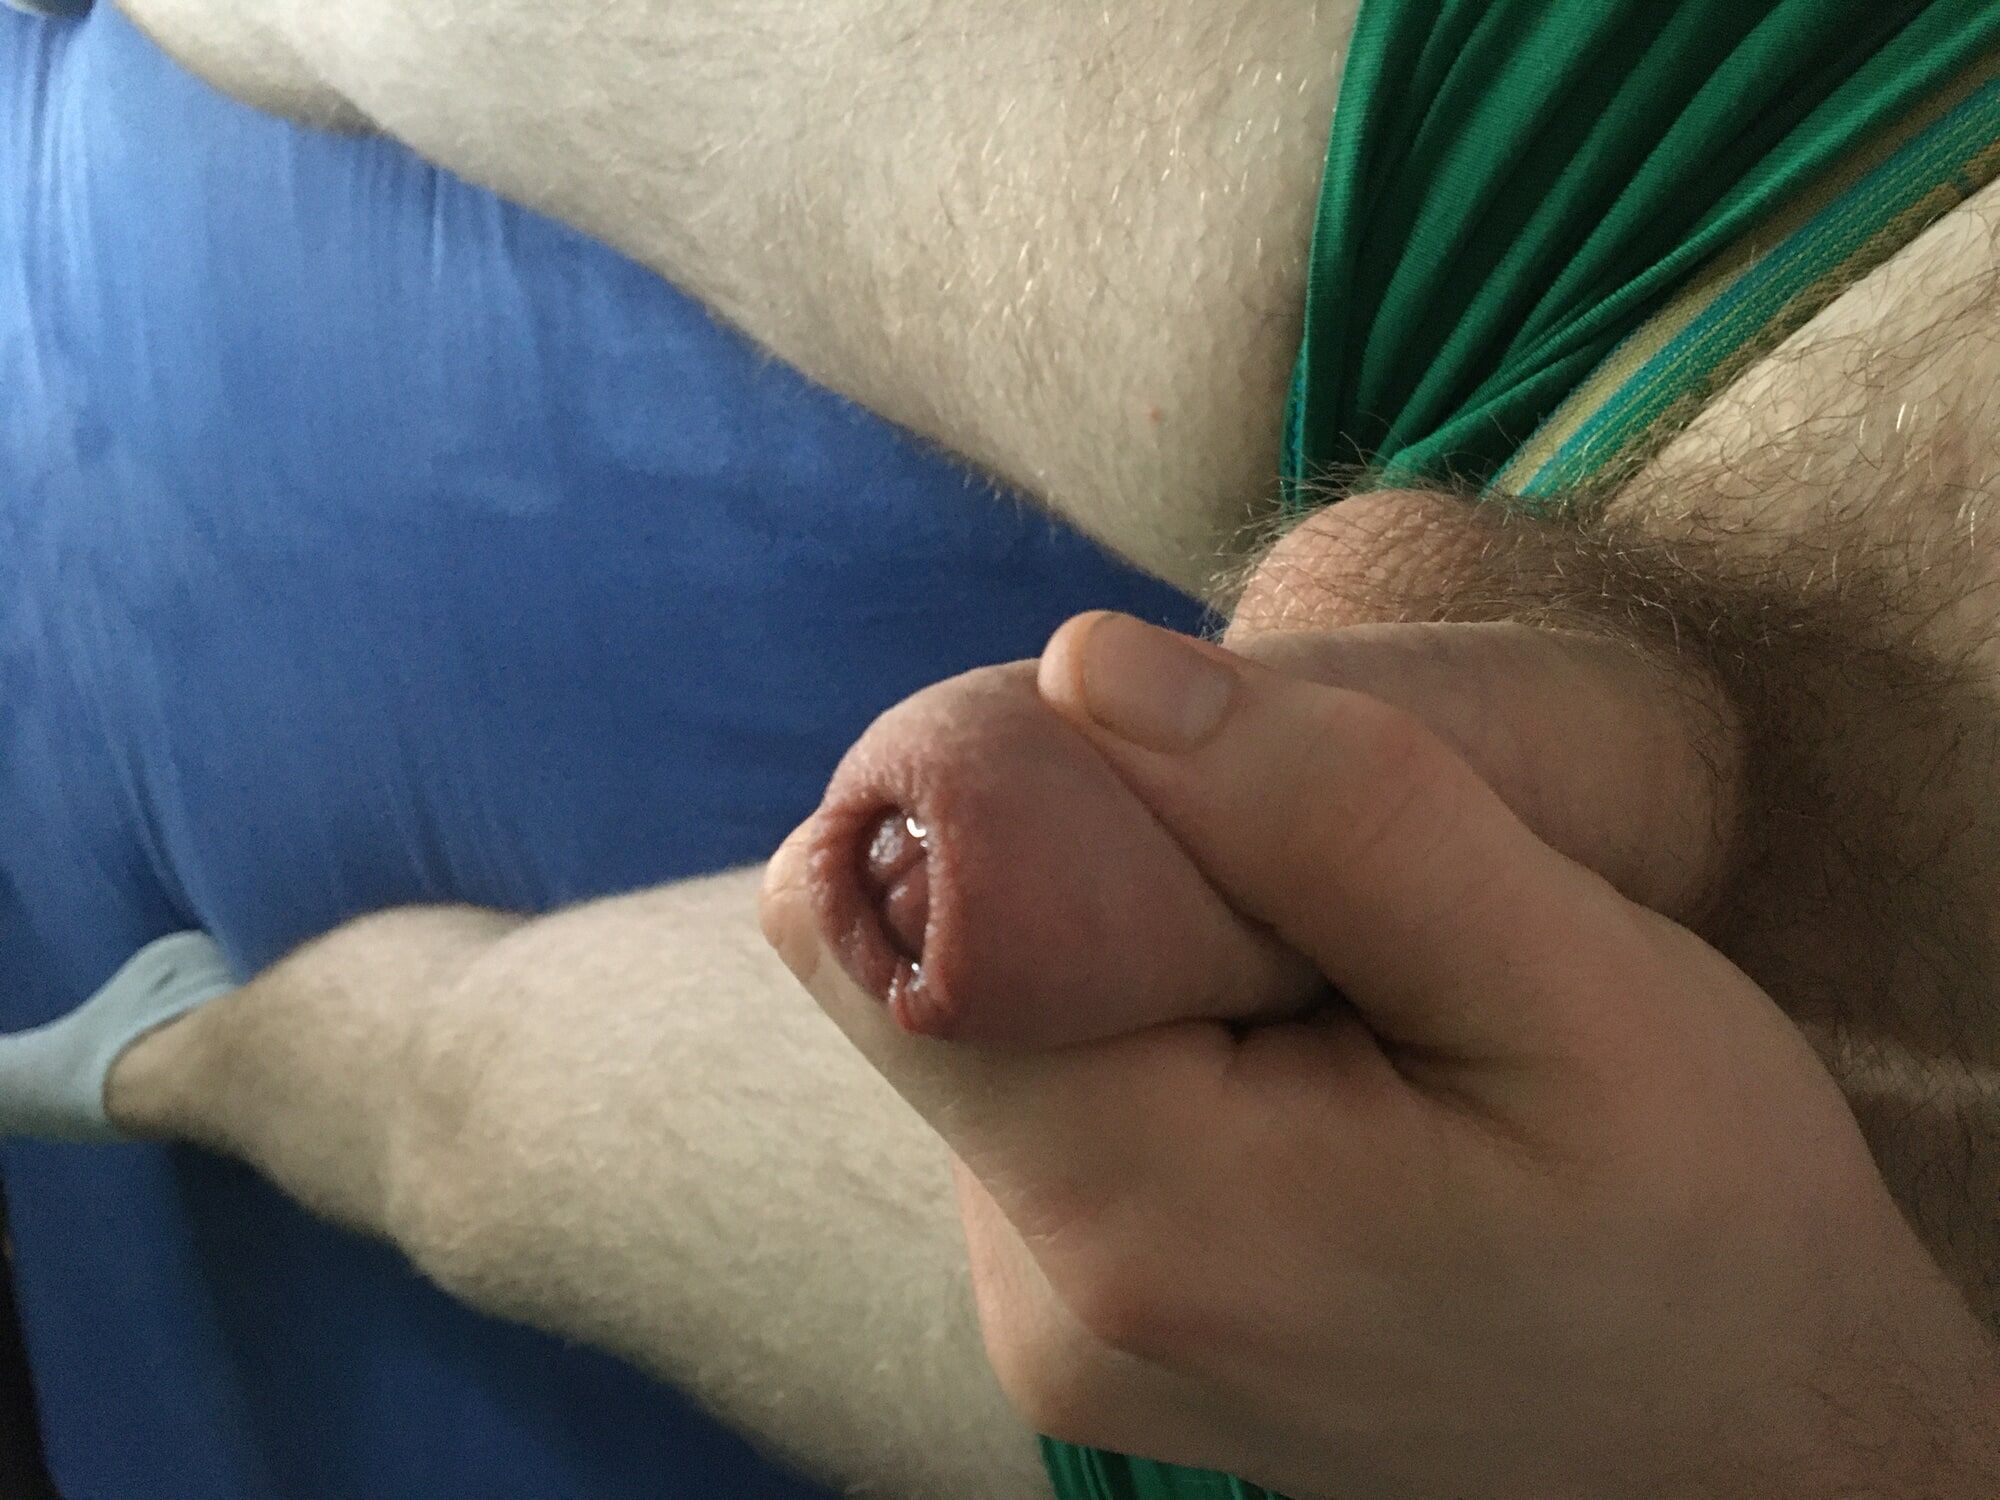 Hairy Dick And Balls Cockhead Foreskin Play With Pre- Cum #46